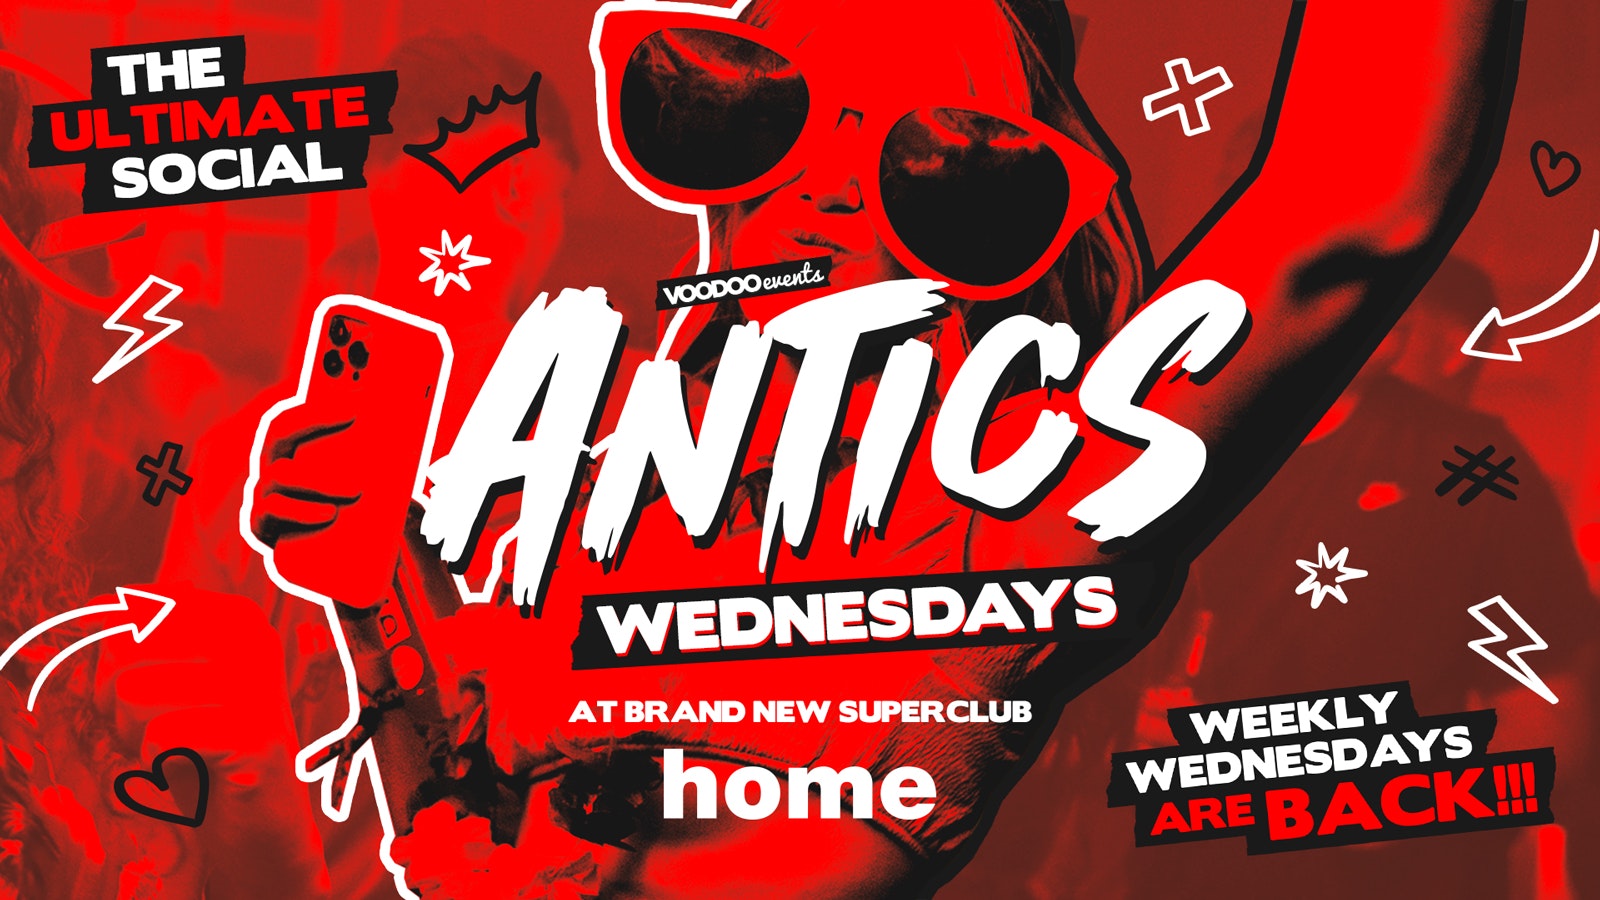 Antics @ THE BRAND NEW SUPER CLUB HOME – The OFFICIAL Varsity Afterparty – Wednesday 24th April